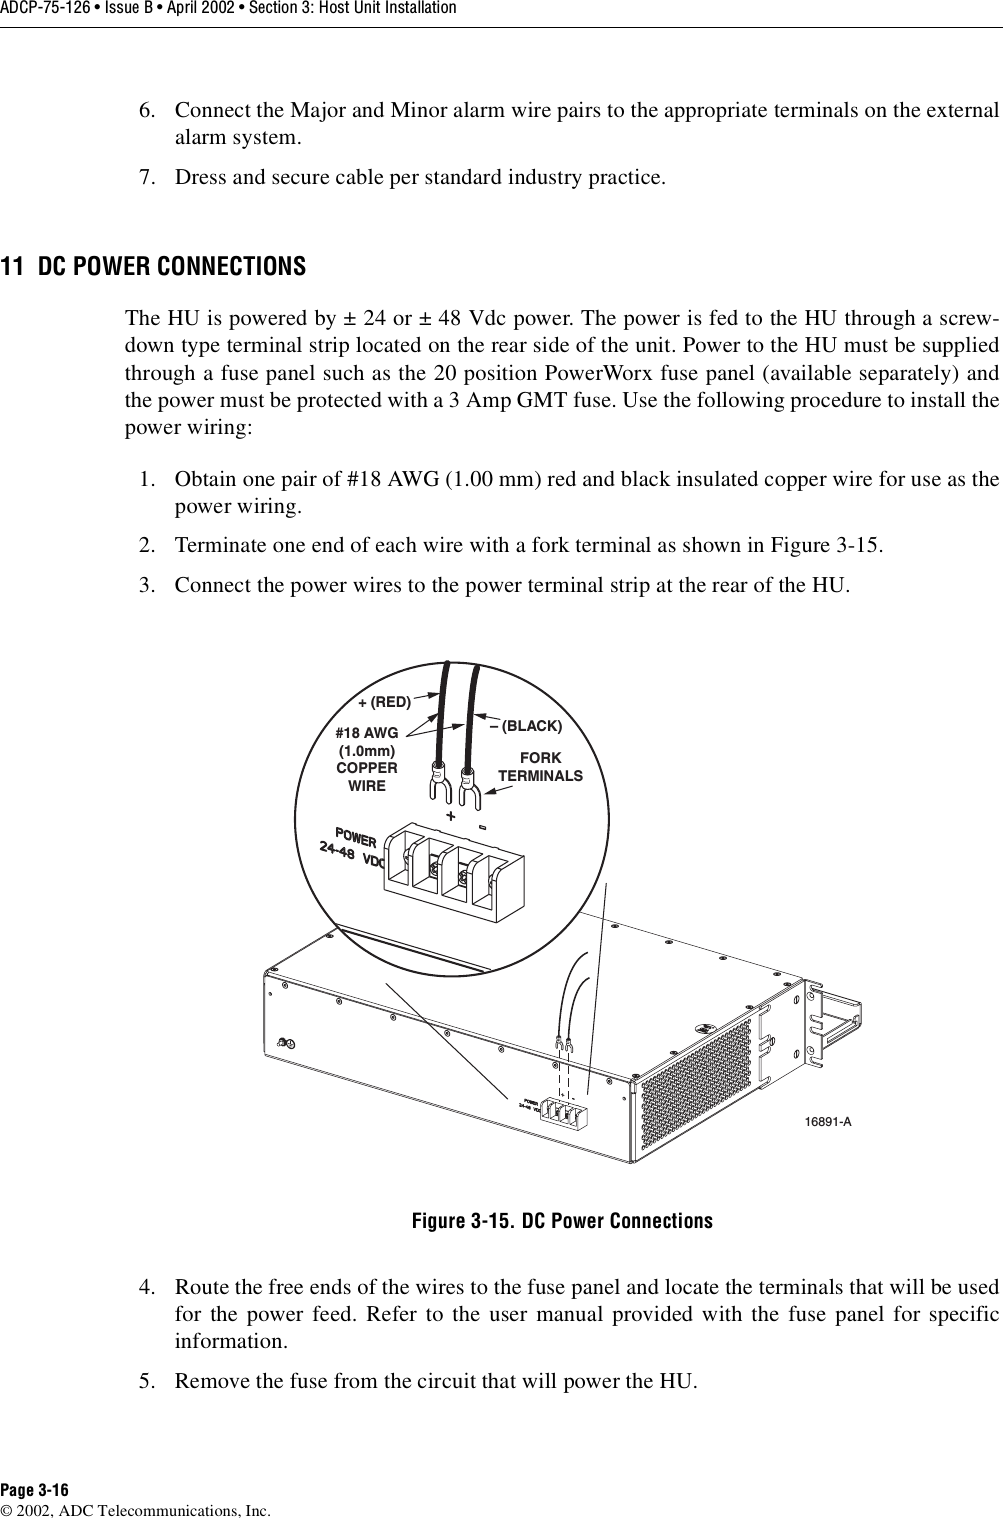 ADCP-75-126 • Issue B • April 2002 • Section 3: Host Unit InstallationPage 3-16©2002, ADC Telecommunications, Inc.6. Connect the Major and Minor alarm wire pairs to the appropriate terminals on the externalalarm system.7. Dress and secure cable per standard industry practice.11 DC POWER CONNECTIONSThe HU is powered by ±24 or ±48 Vdc power. The power is fed to the HU through ascrew-down type terminal strip located on the rear side of the unit. Power to the HU must be suppliedthrough afuse panel such as the 20 position PowerWorx fuse panel (available separately) andthe power must be protected with a 3 Amp GMT fuse. Use the following procedure to install thepower wiring:1. Obtain one pair of #18 AWG (1.00 mm) red and black insulated copper wire for use as thepower wiring.2. Terminate one end of each wire with afork terminal as shown in Figure 3-15.3. Connect the power wires to the power terminal strip at the rear of the HU.Figure 3-15. DC Power Connections4. Route the free ends of the wires to the fuse panel and locate the terminals that will be usedfor the power feed. Refer to the user manual provided with the fuse panel for specificinformation.5. Remove the fuse from the circuit that will power the HU.FORKTERMINALS#18 AWG(1.0mm)COPPERWIRE+ (RED)– (BLACK)16891-A